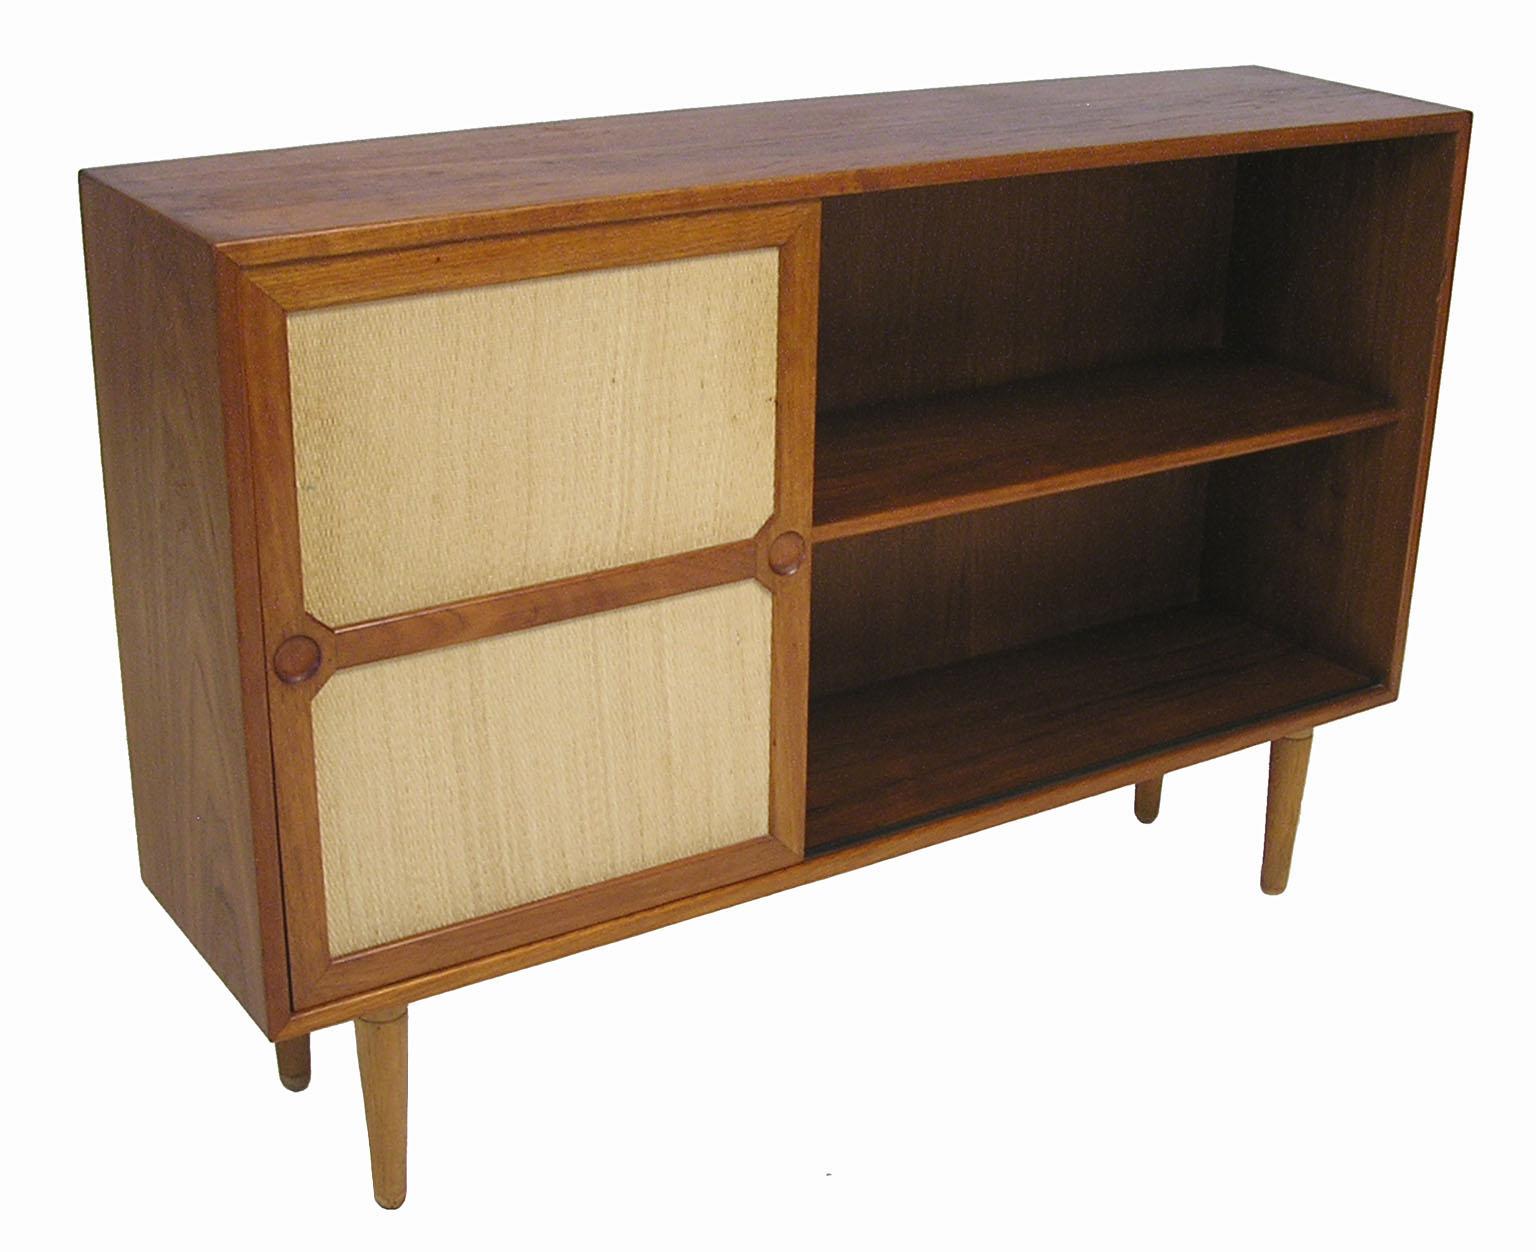 A rare teak bookshelf cabinet from the 1950s Danish Mid-Century Modern era. Quality craftsmanship throughout featuring a unique seagrass panelled sliding door with inset elliptical pulls, adjustable shelving and tapered oak conical legs. The low and